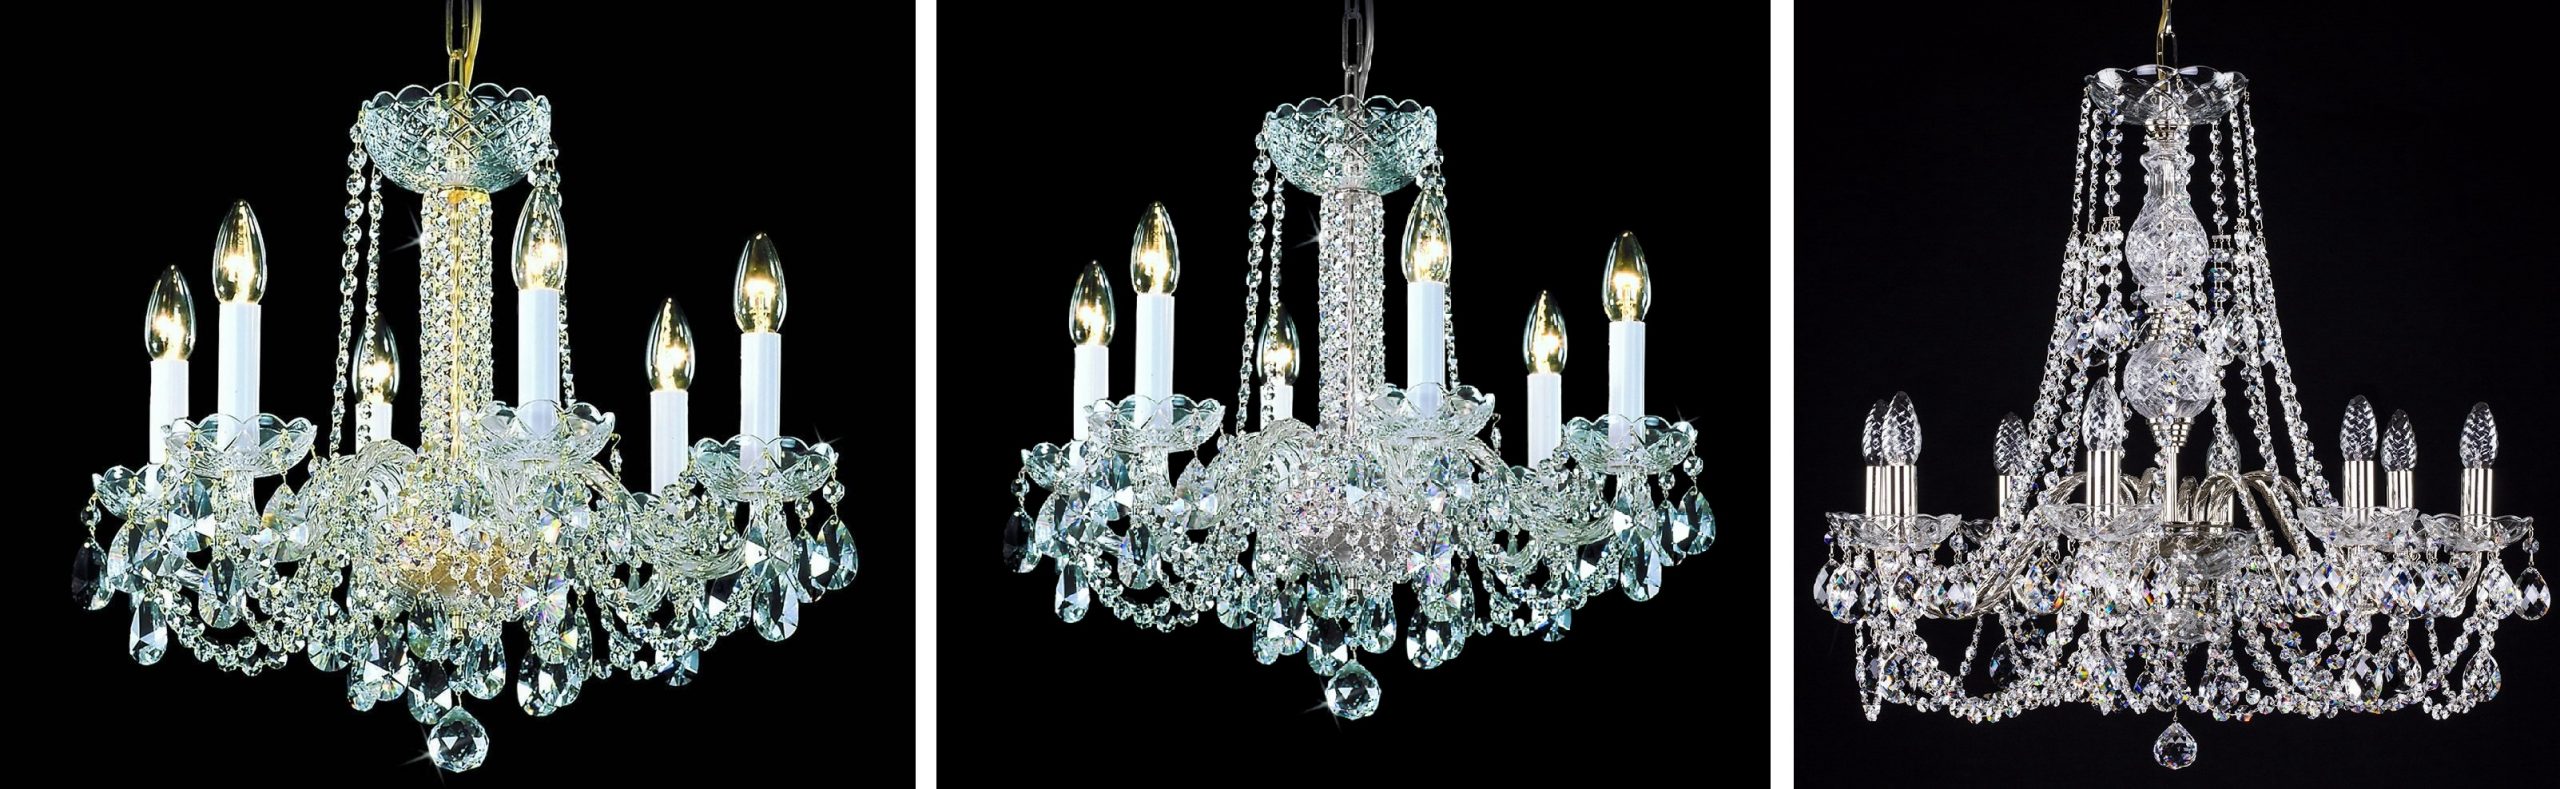 Chandelier rental and chandelier hire in France